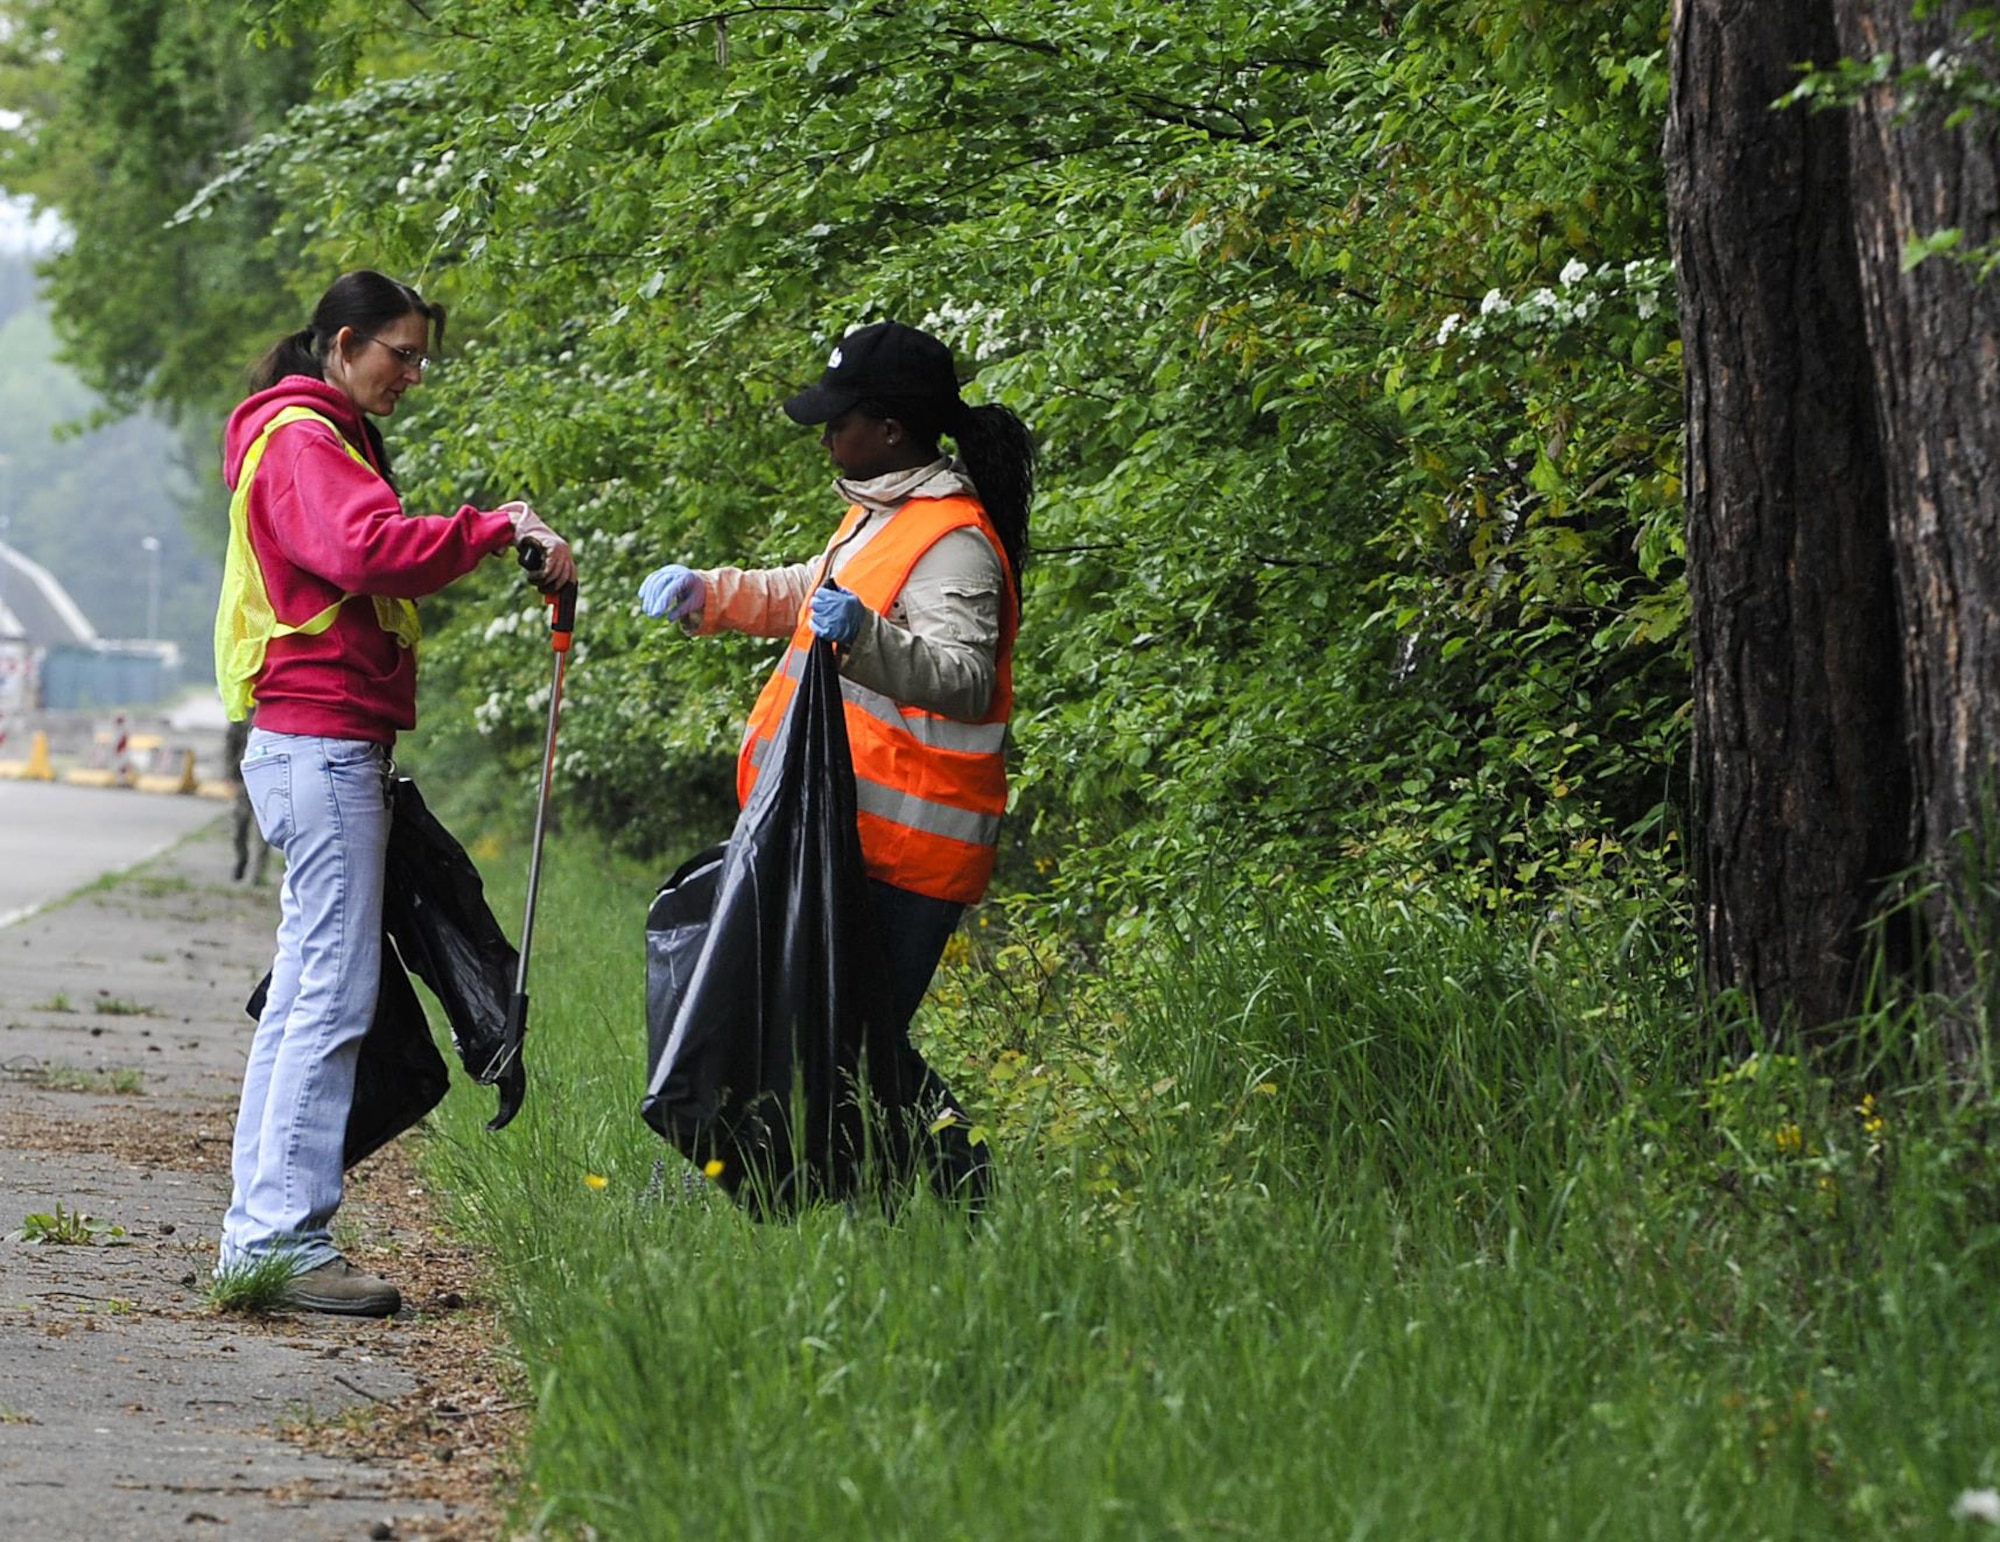 Volunteers pick up trash during an off-base clean-up event May 20, 2016, at Ramstein Air Base, Germany. Approximately 30 volunteers participated in ensuring the environment outside of Ramstein Air Base is kept clean. (U.S. Air Force photo/Senior Airman Larissa Greatwood)